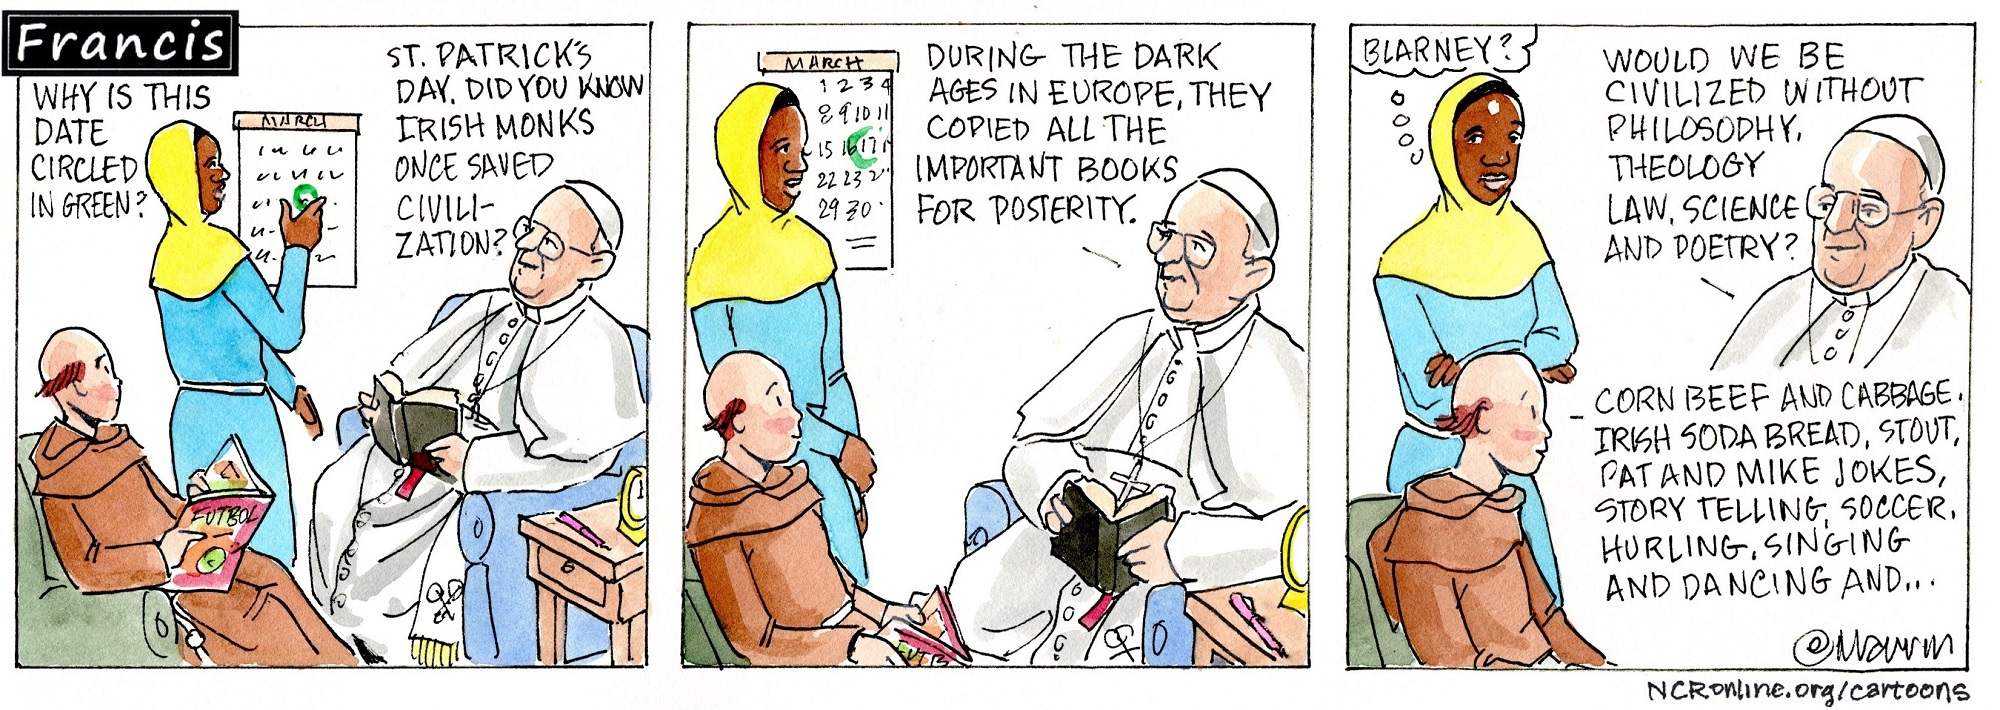 Francis, the comic strip: Francis, Brother Leo and Gabby discuss the history of St. Patrick's Day. 